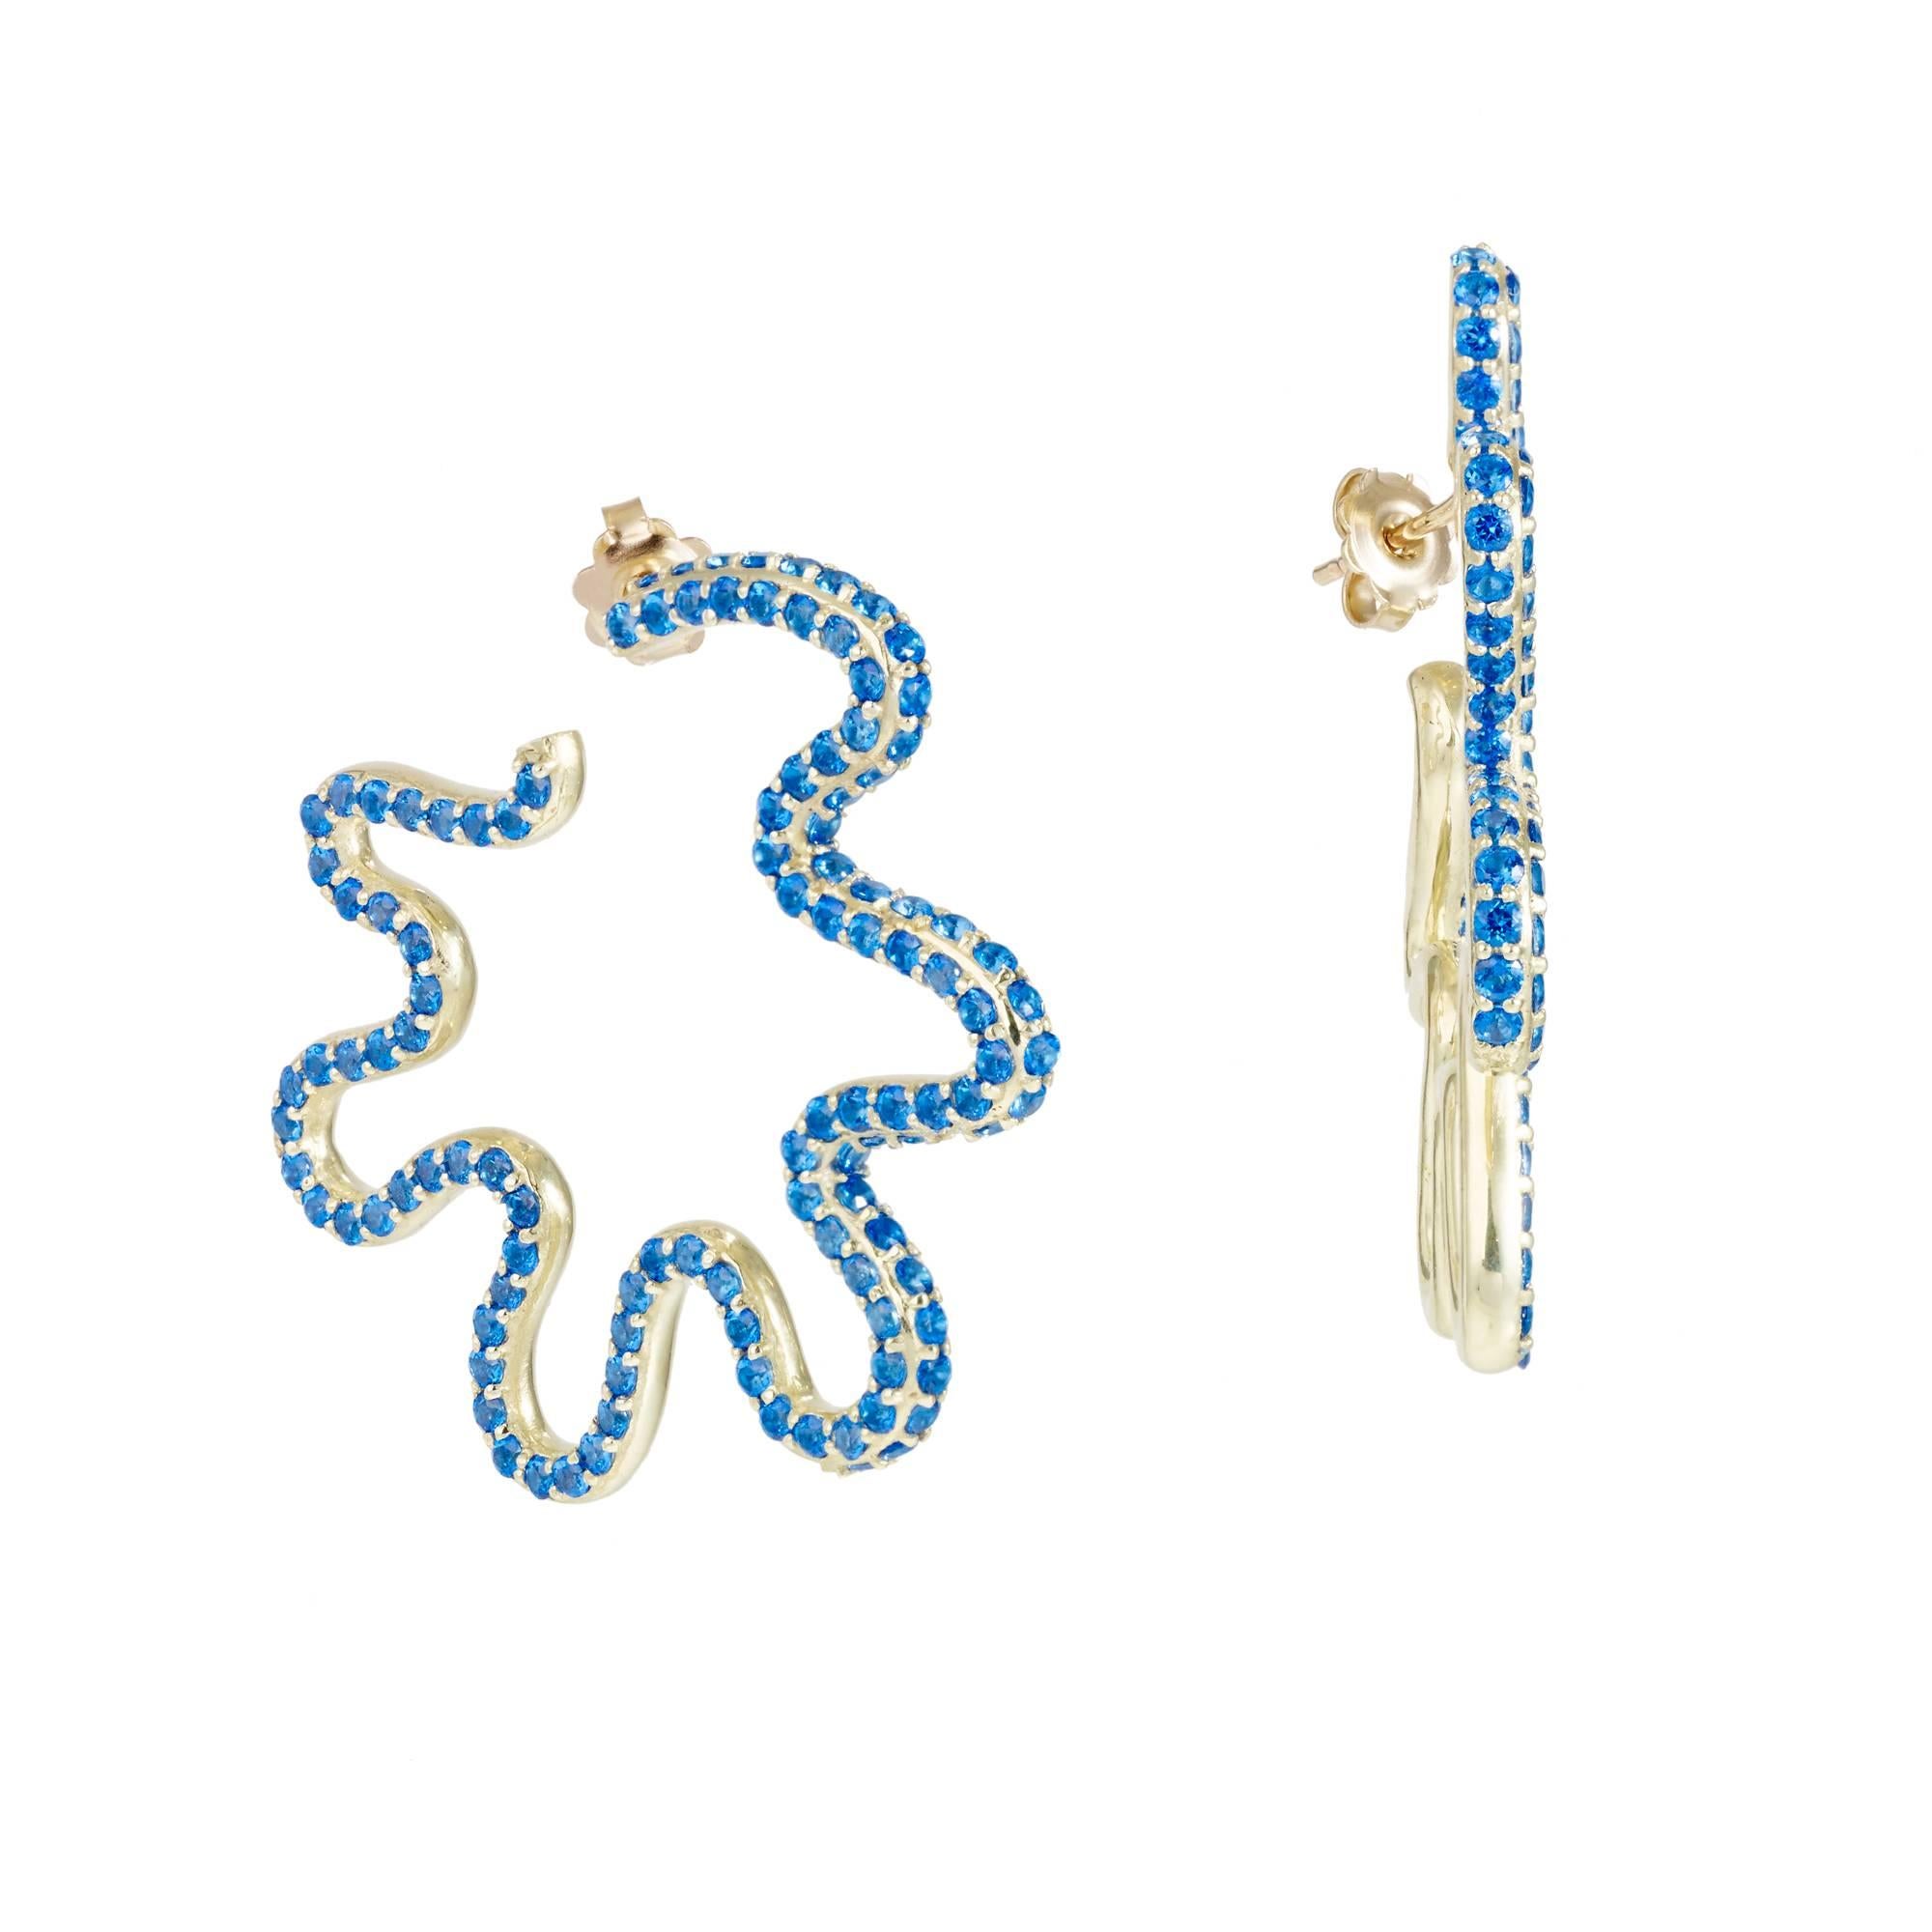 *MADE TO ORDER - 5 WEEK LEAD TIME*

Sabine Getty wiggly hoops earrings in 18k yellow gold set with blue topaz.

Topaz: 9.2ct

Yellow, pink, green and blue. Four colours inspired by the Memphis Group, the
kookiest of Made in Italy designers,